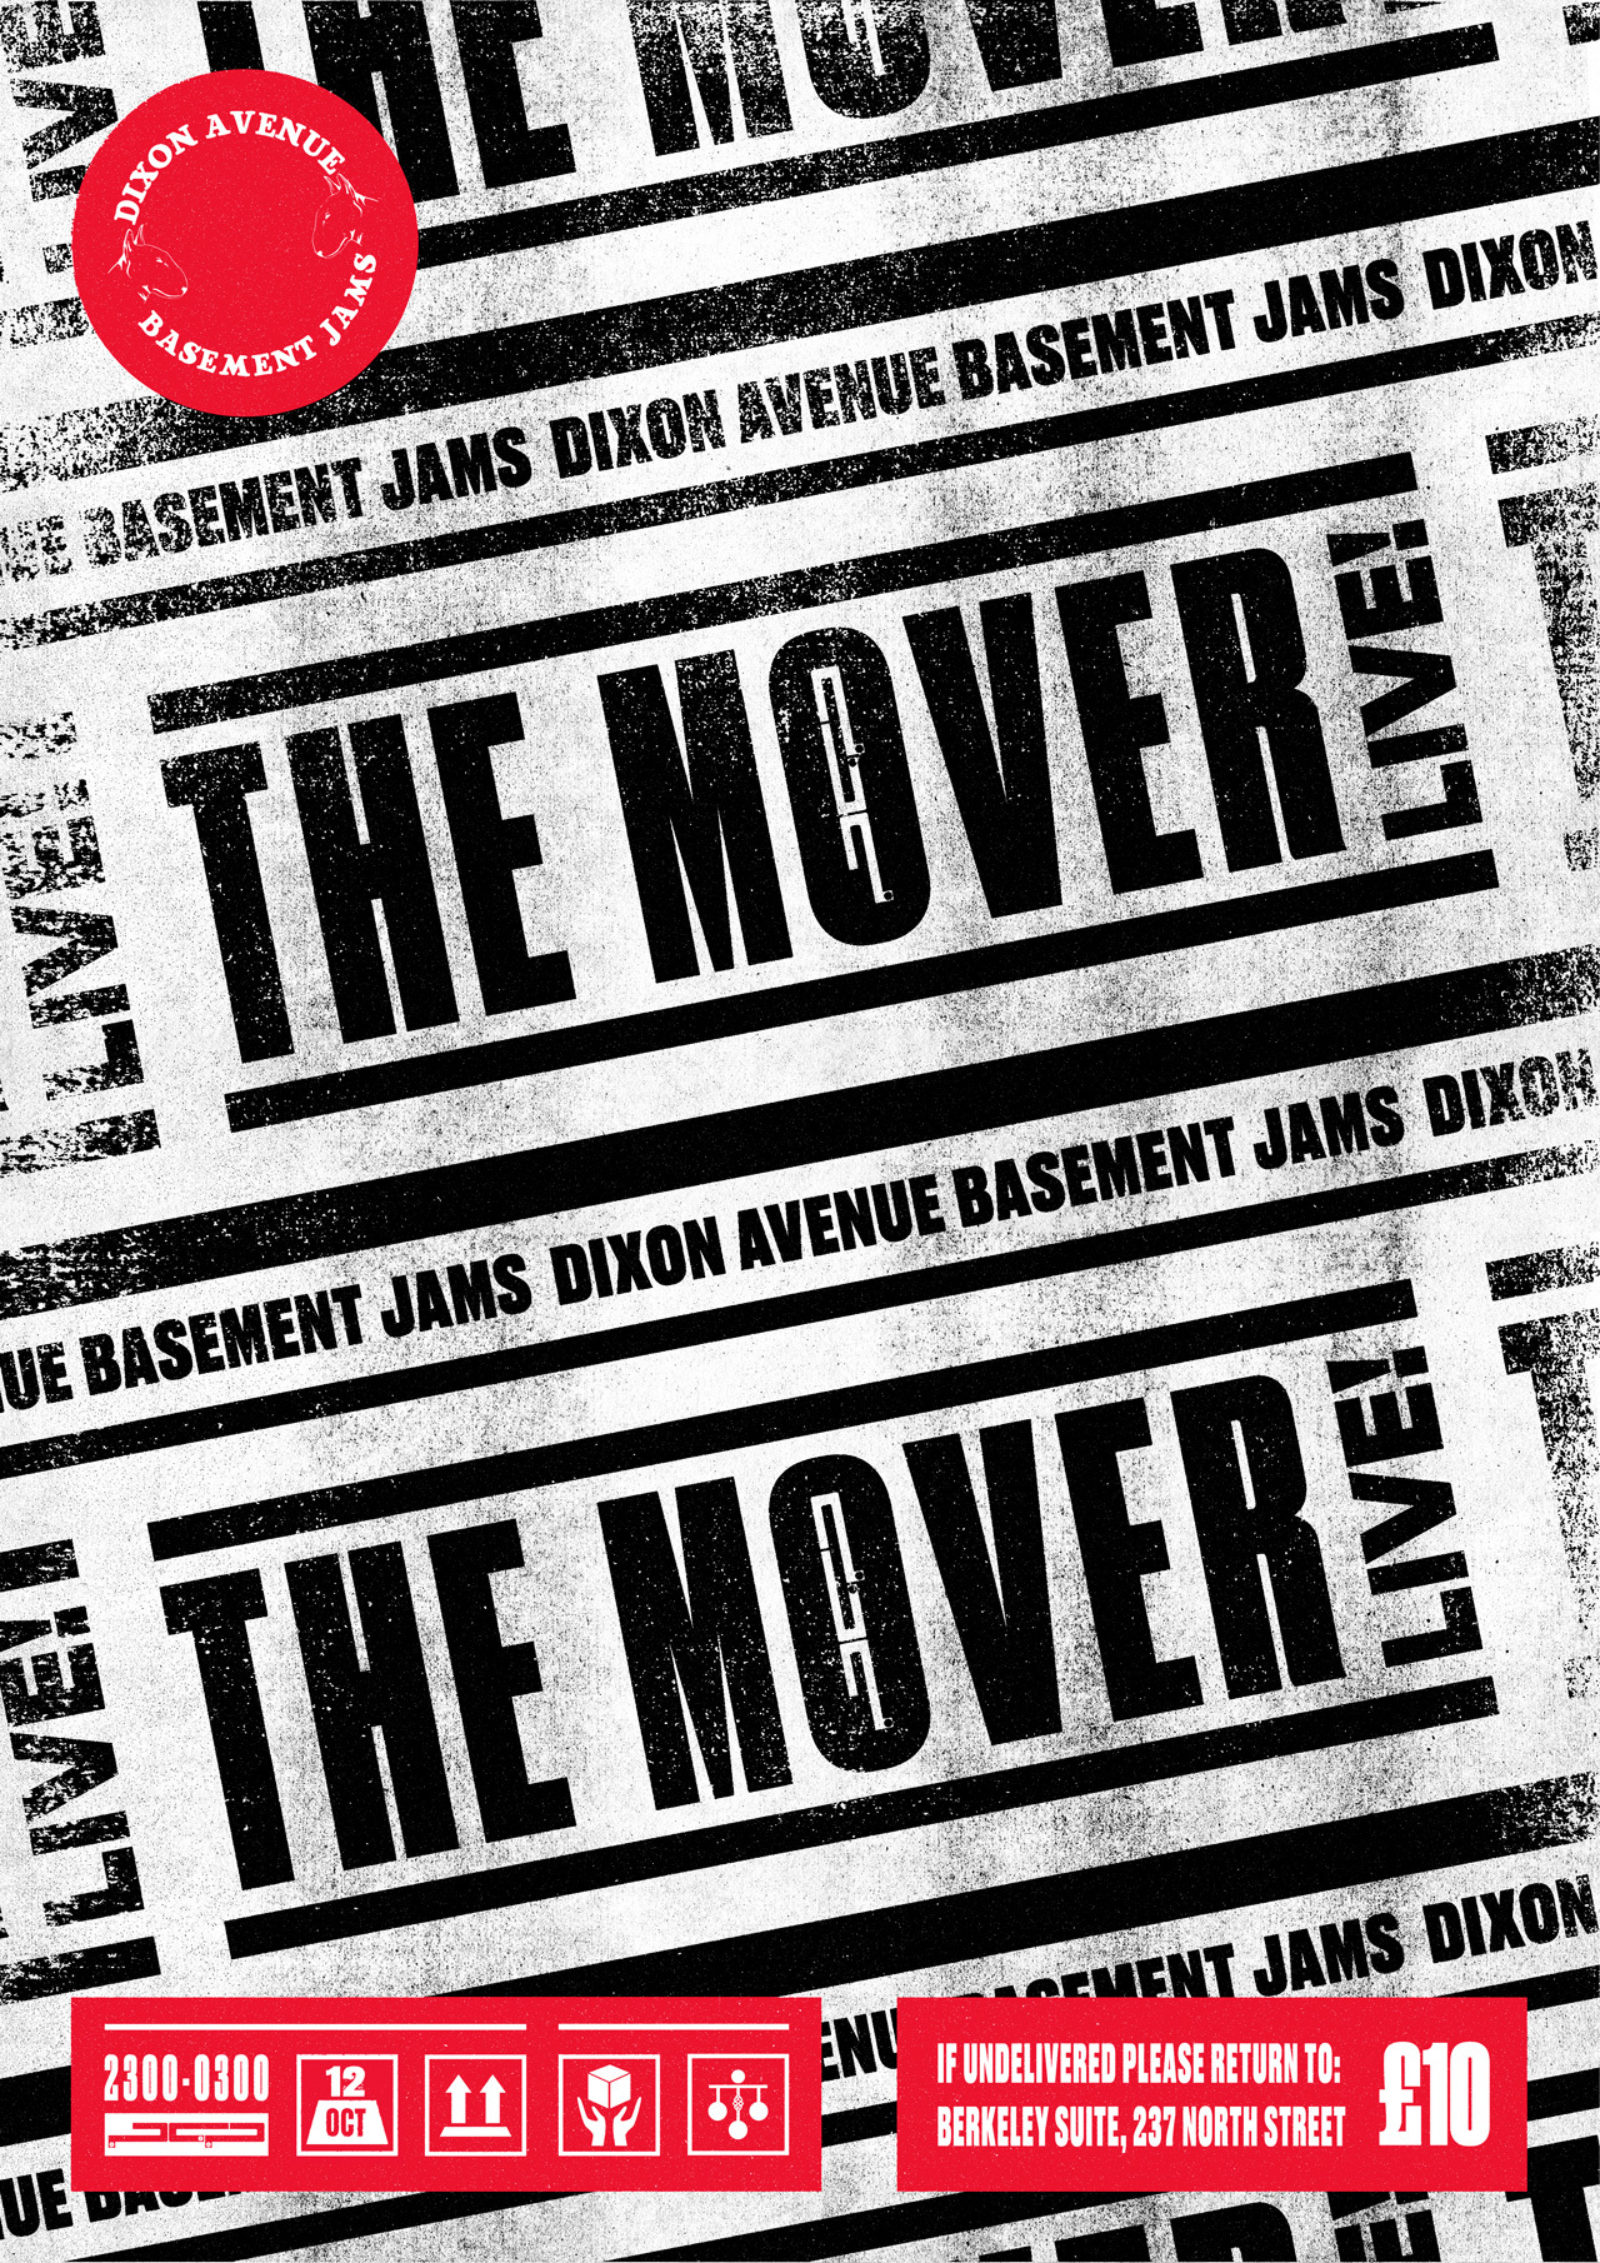 DABJ - The Mover